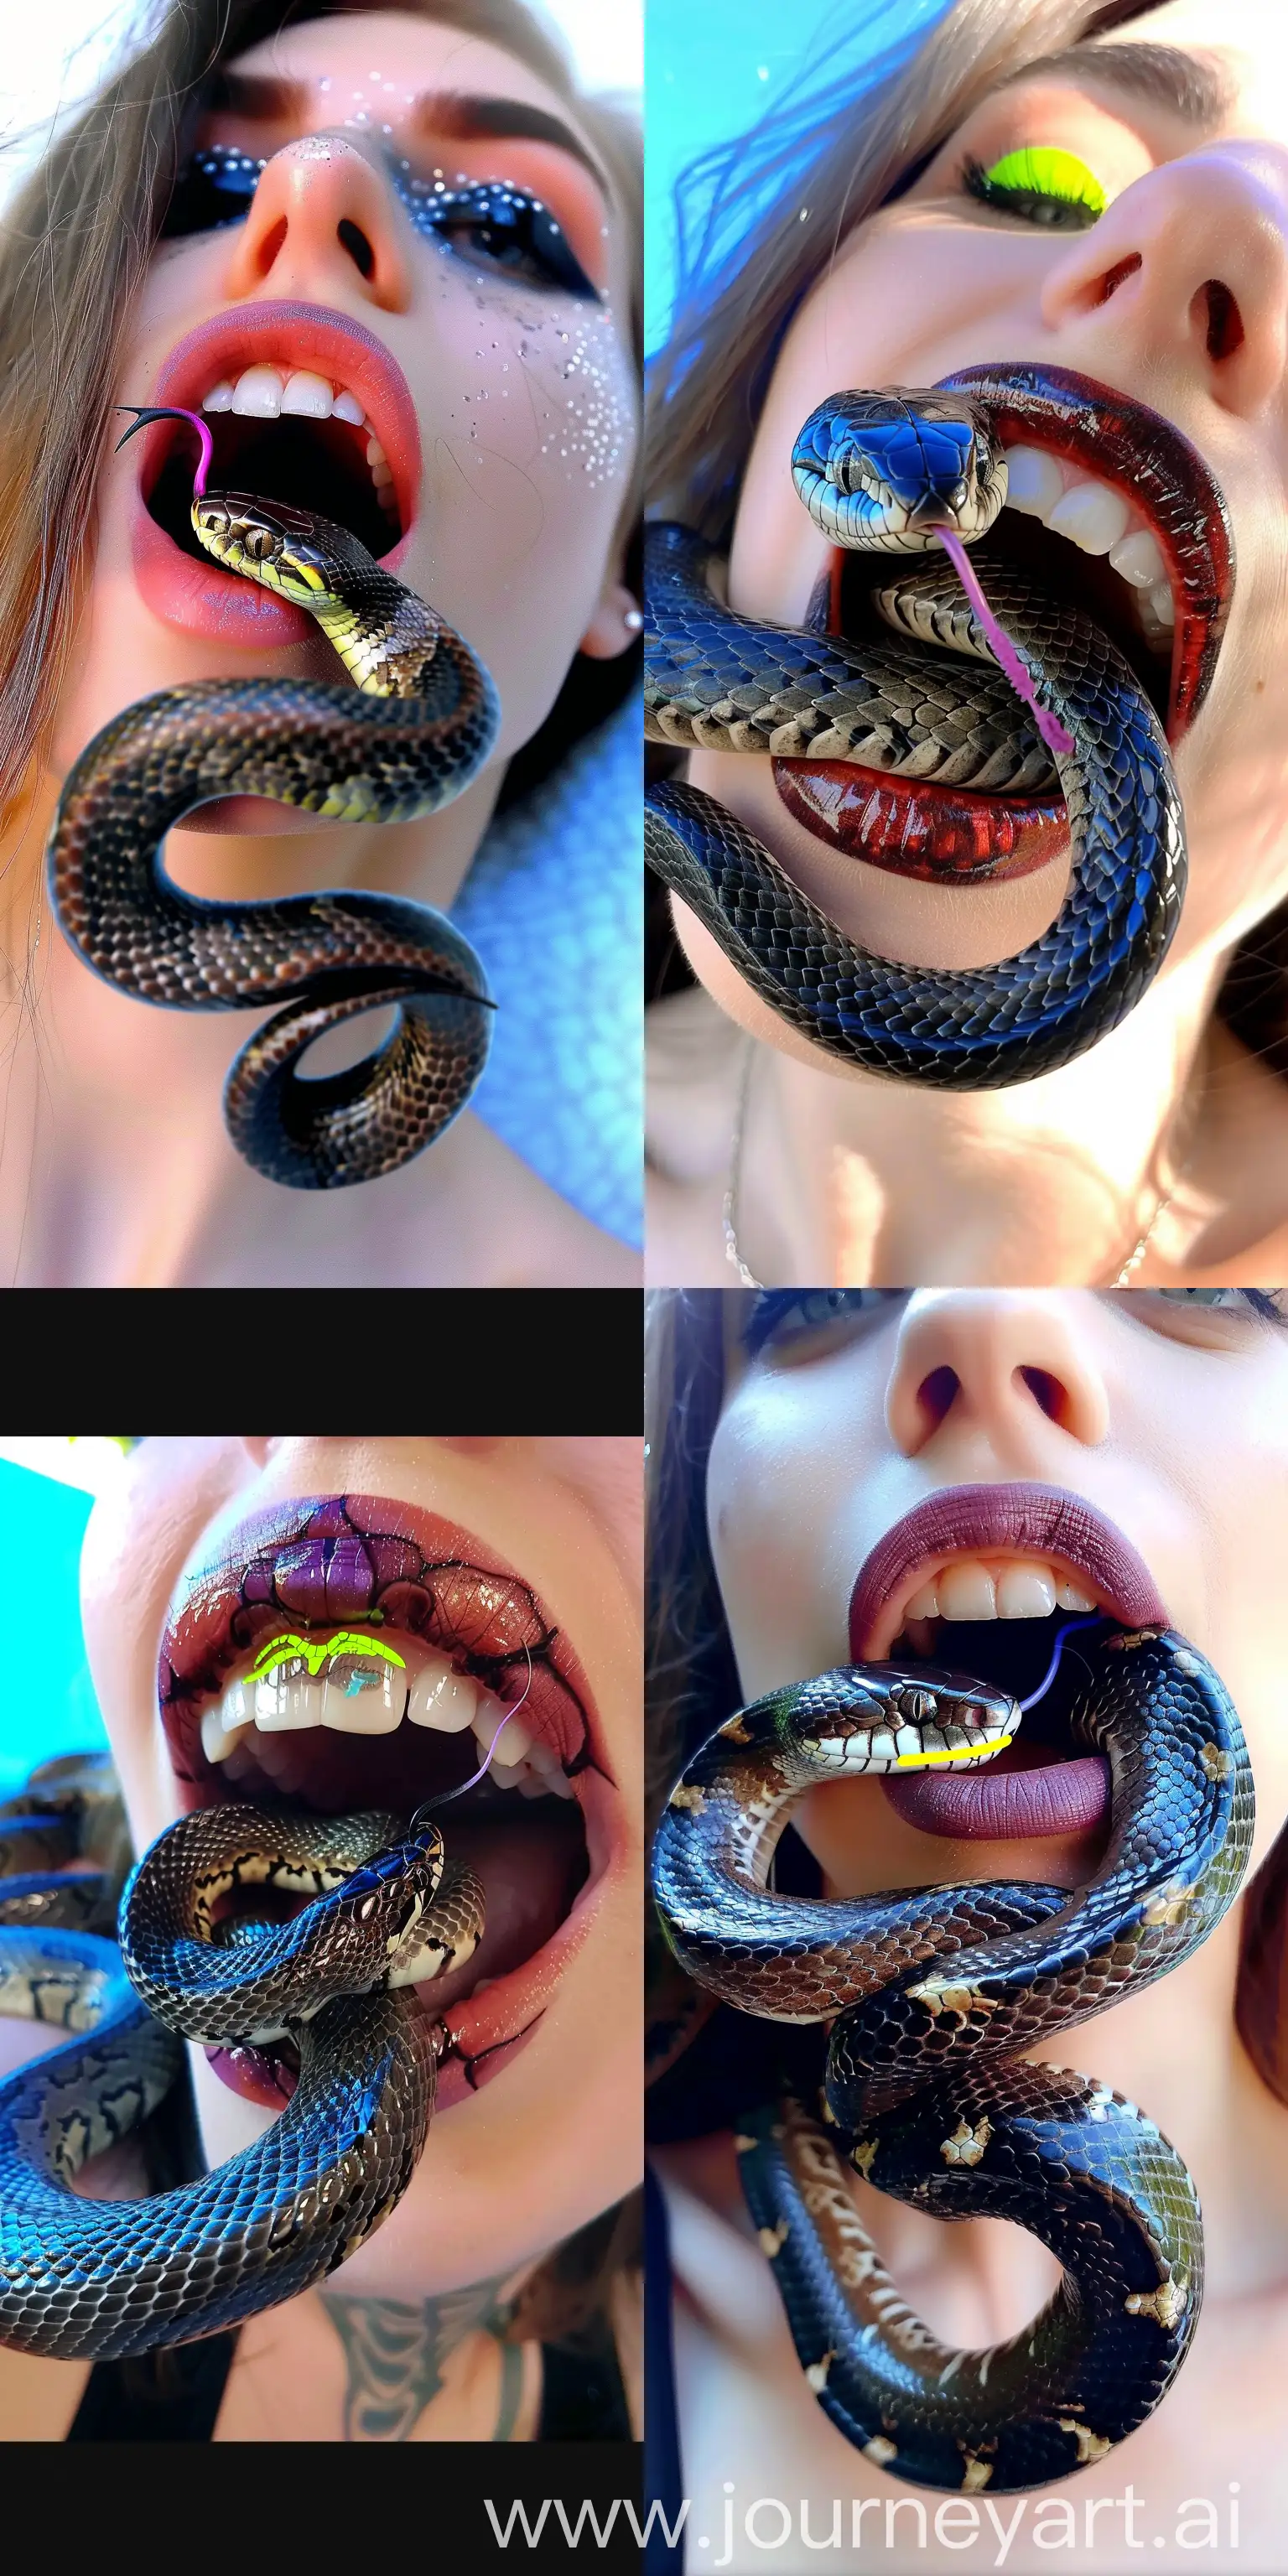 A long shot portrait of a snake emerging from inside a woman's mouth, studio photo, white background, neon purple lipstick, white background --sref https://i.pinimg.com/originals/1c/46/8a/1c468ab47254128677bae852aed08dce.jpg --cref https://i.pinimg.com/originals/3b/49/6d/3b496d3ba1b7a6333bec7929fda8049f.jpg https://i.pinimg.com/originals/30/8d/77/308d77998eeb67b37975088b5ea771c9.jpg --v 6 --style raw --ar 7:14